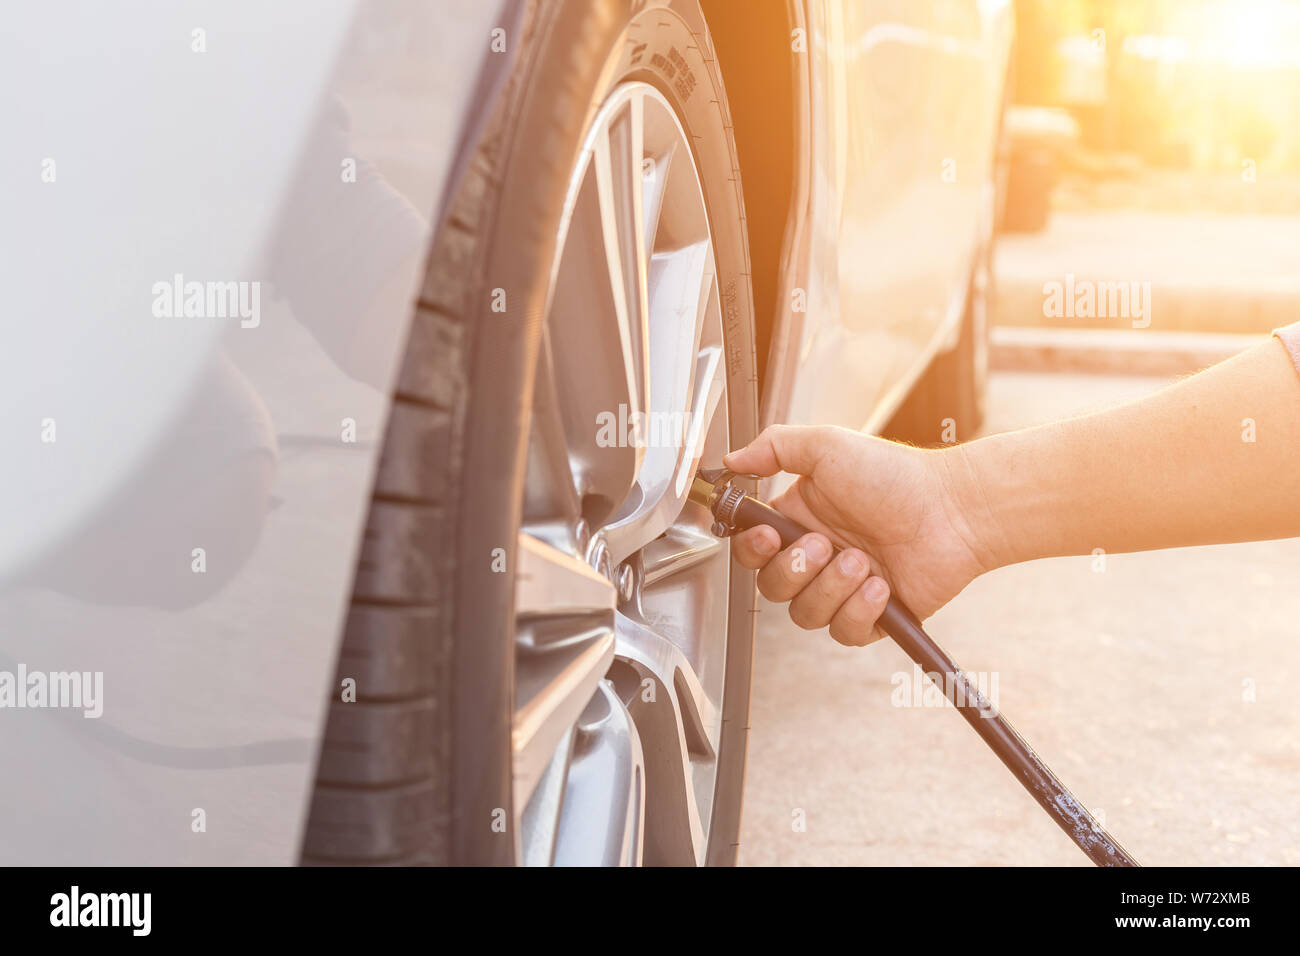 Man checking air pressure and filling air in the tires of his car Stock Photo